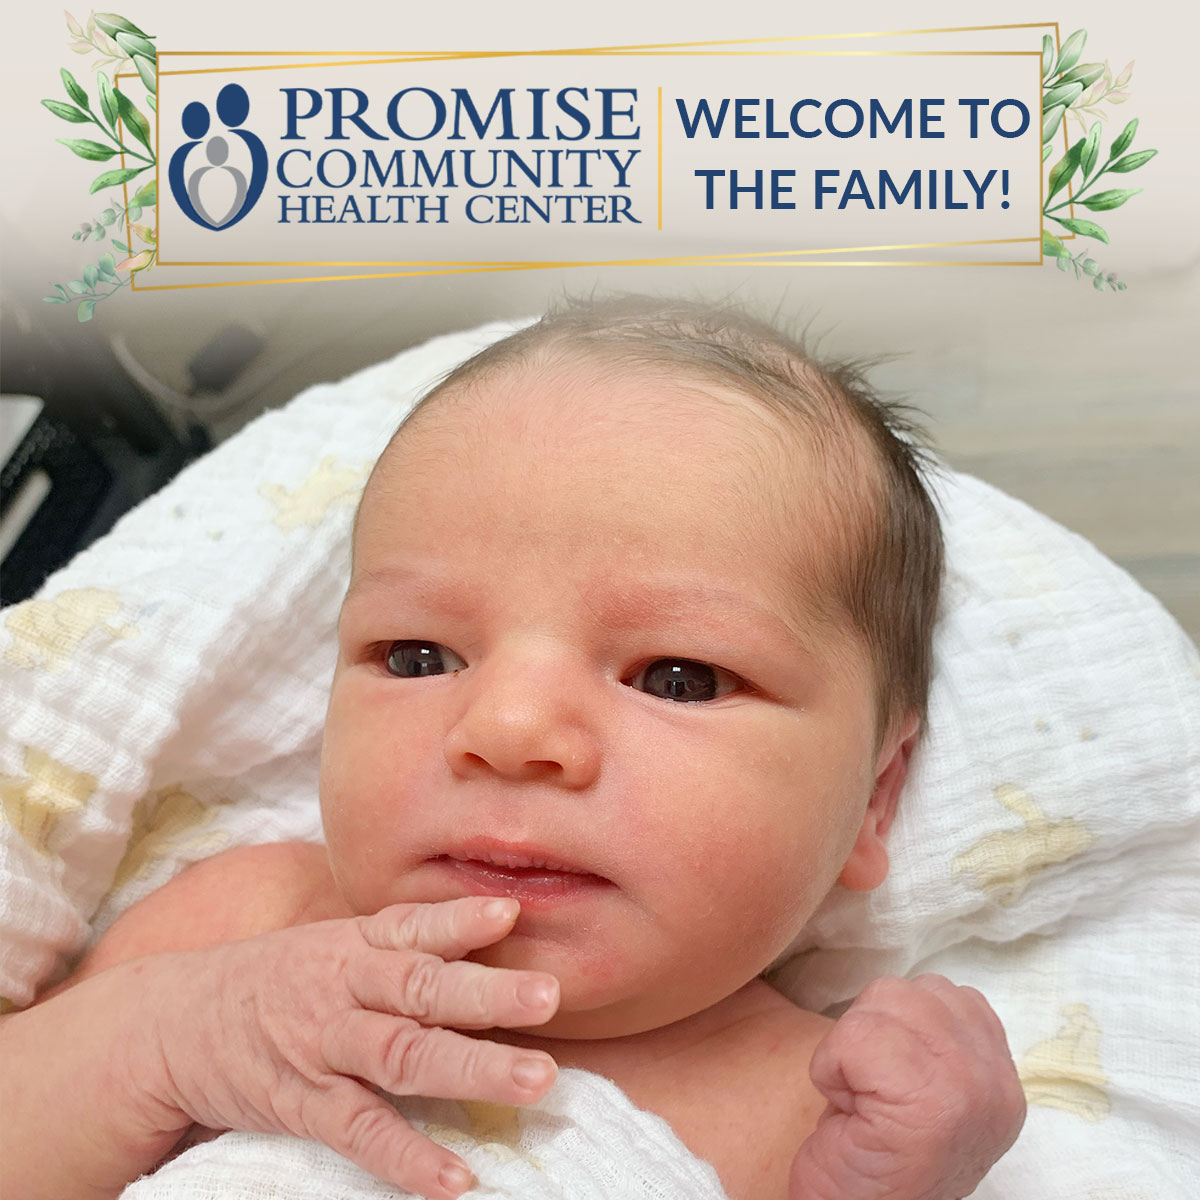 Home birth in Sioux City, Iowa |Promise Community Health Center in Sioux Center, Iowa | Home births in northwest Iowa, Home births in southeast South Dakota, Home births in southwest Minnesota | Home births in Sioux Falls South Dakota, Home births in Beresford South Dakota, Home births in Sioux City IA, Home births in LeMars IA, Home births in Worthington MN, Home births in Iowa, Home births in South Dakota, Home births in Minnesota